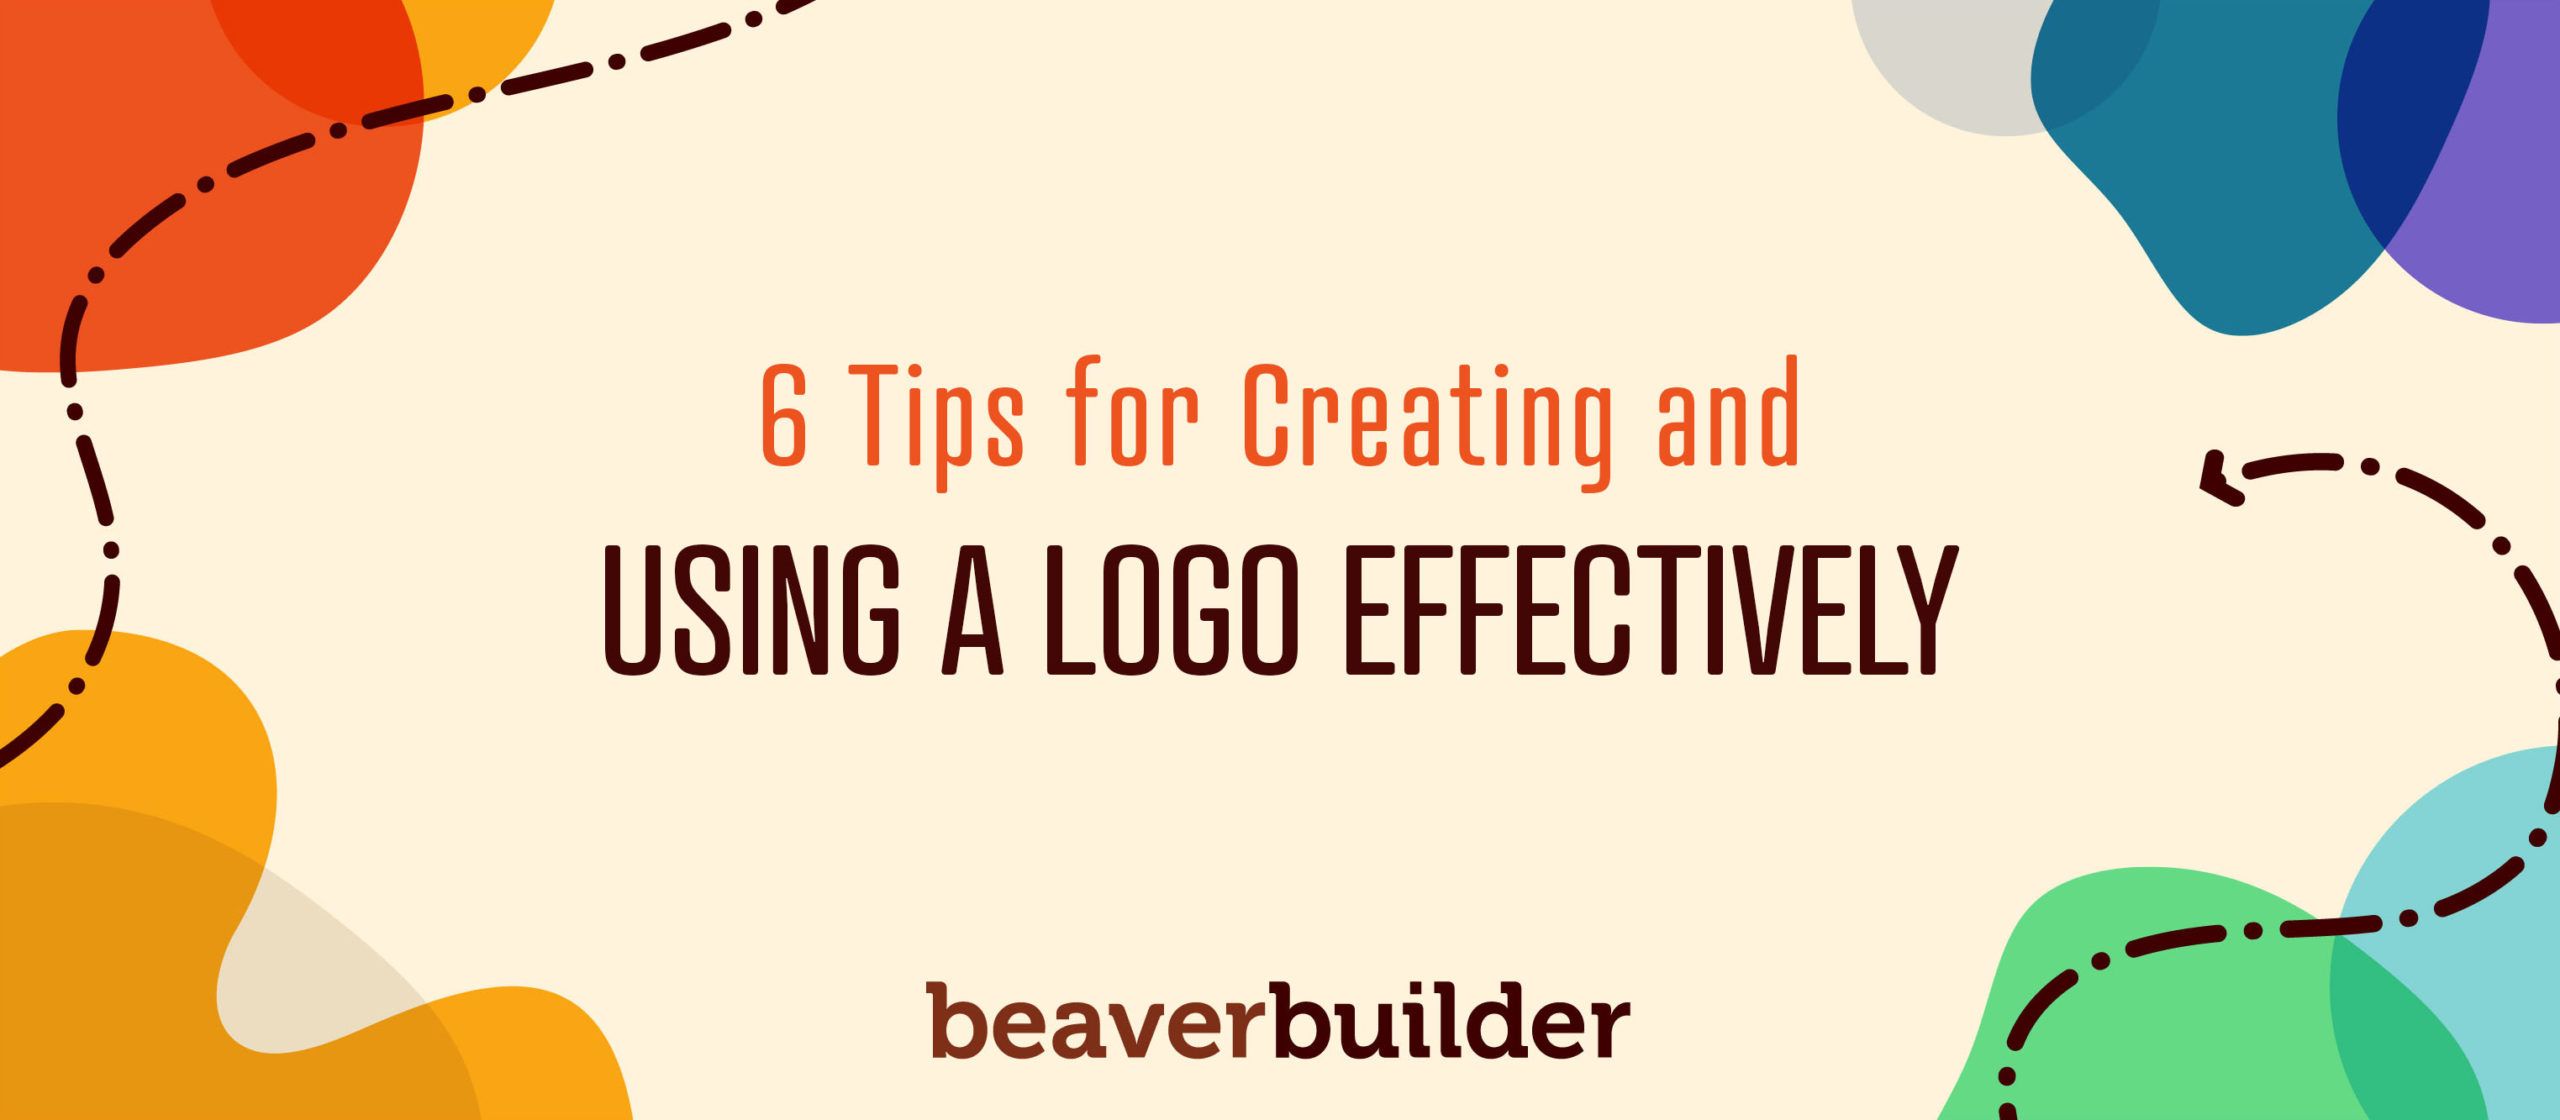 Lv Logo designs, themes, templates and downloadable graphic